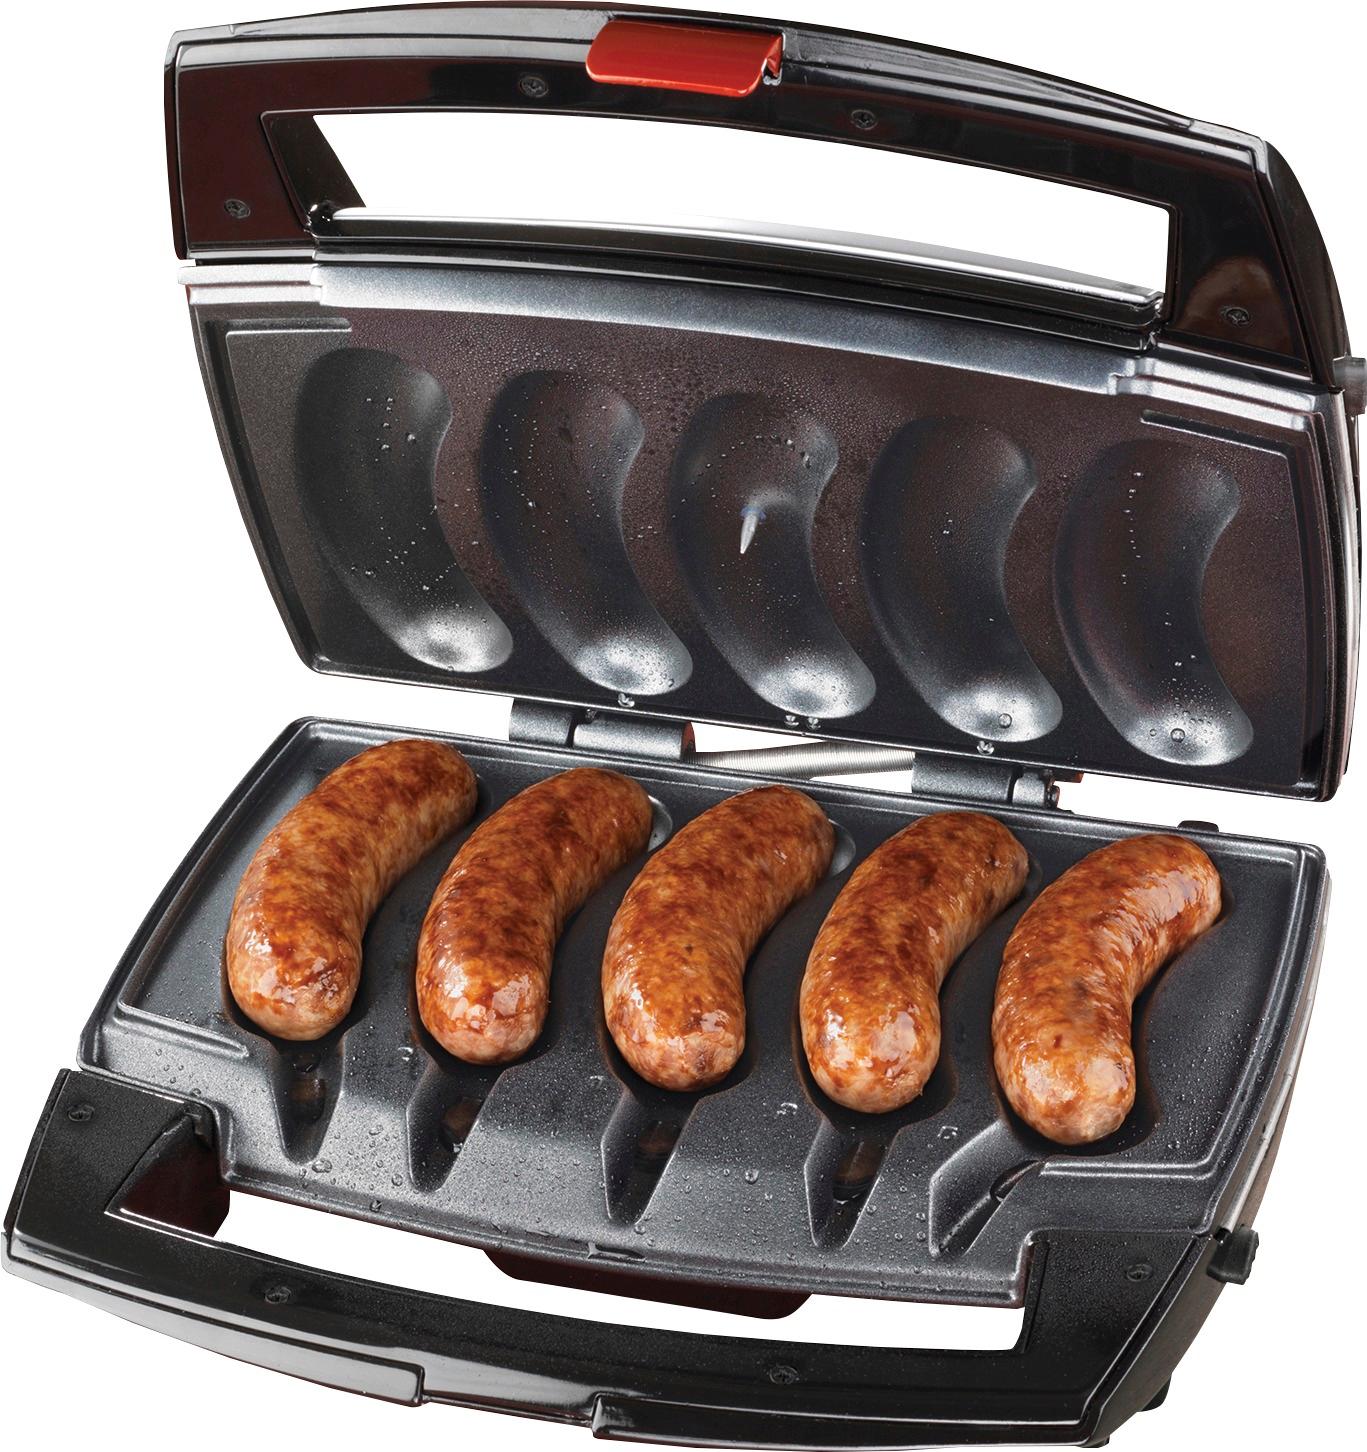 5 Pros And Cons For The Johnsonville Indoor Brat Grill For RV Camping